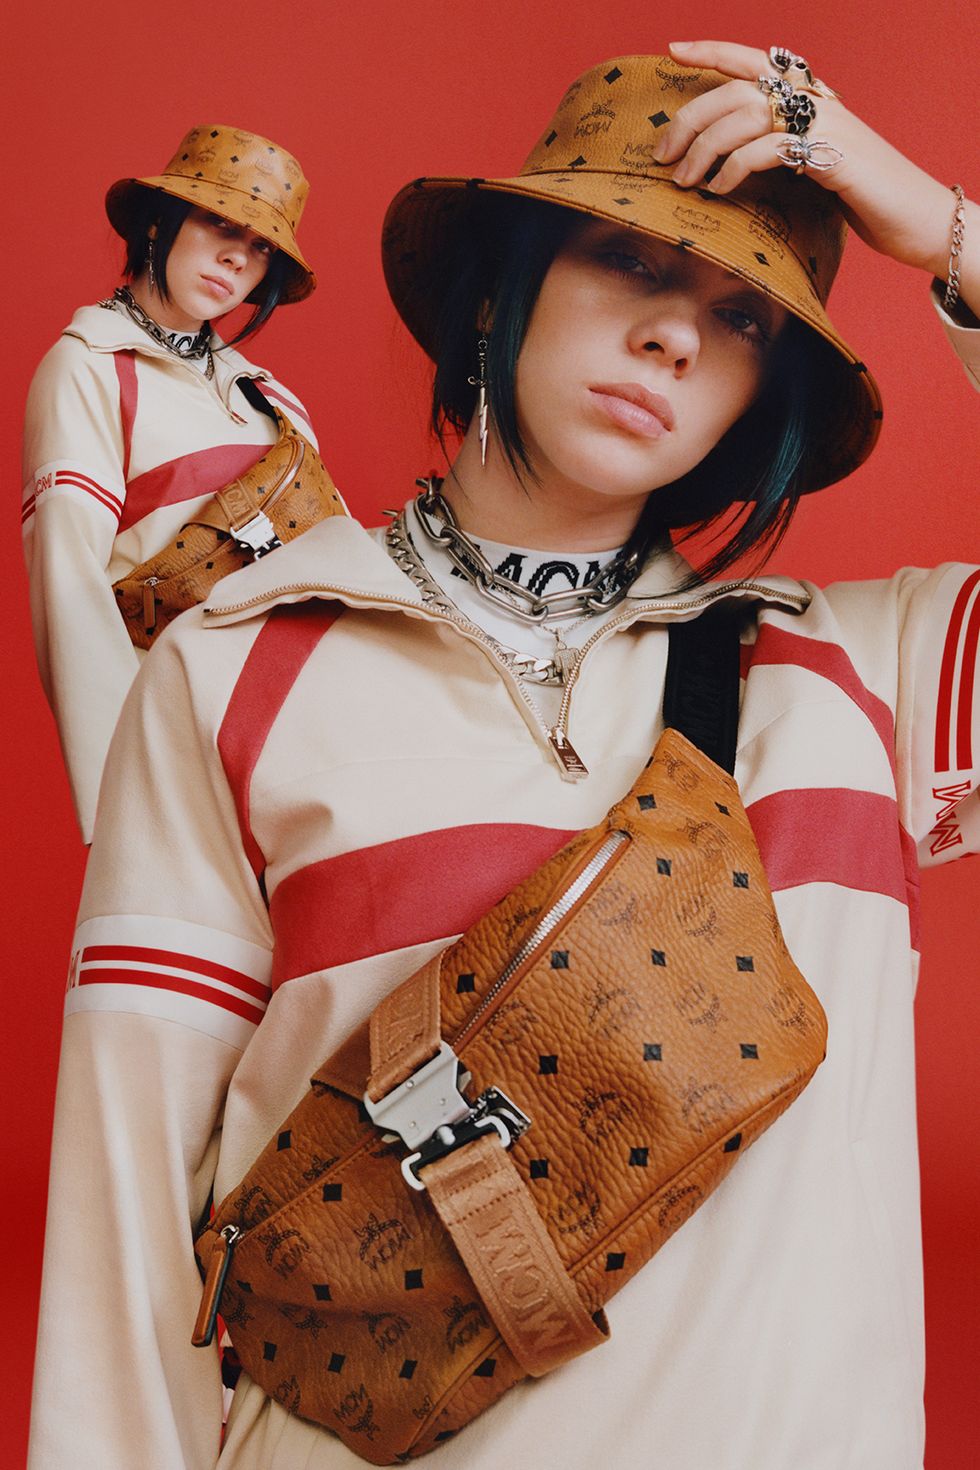 Fall 2019 Fashion Campaigns - All The Fall '19 Campaigns Worth Looking At